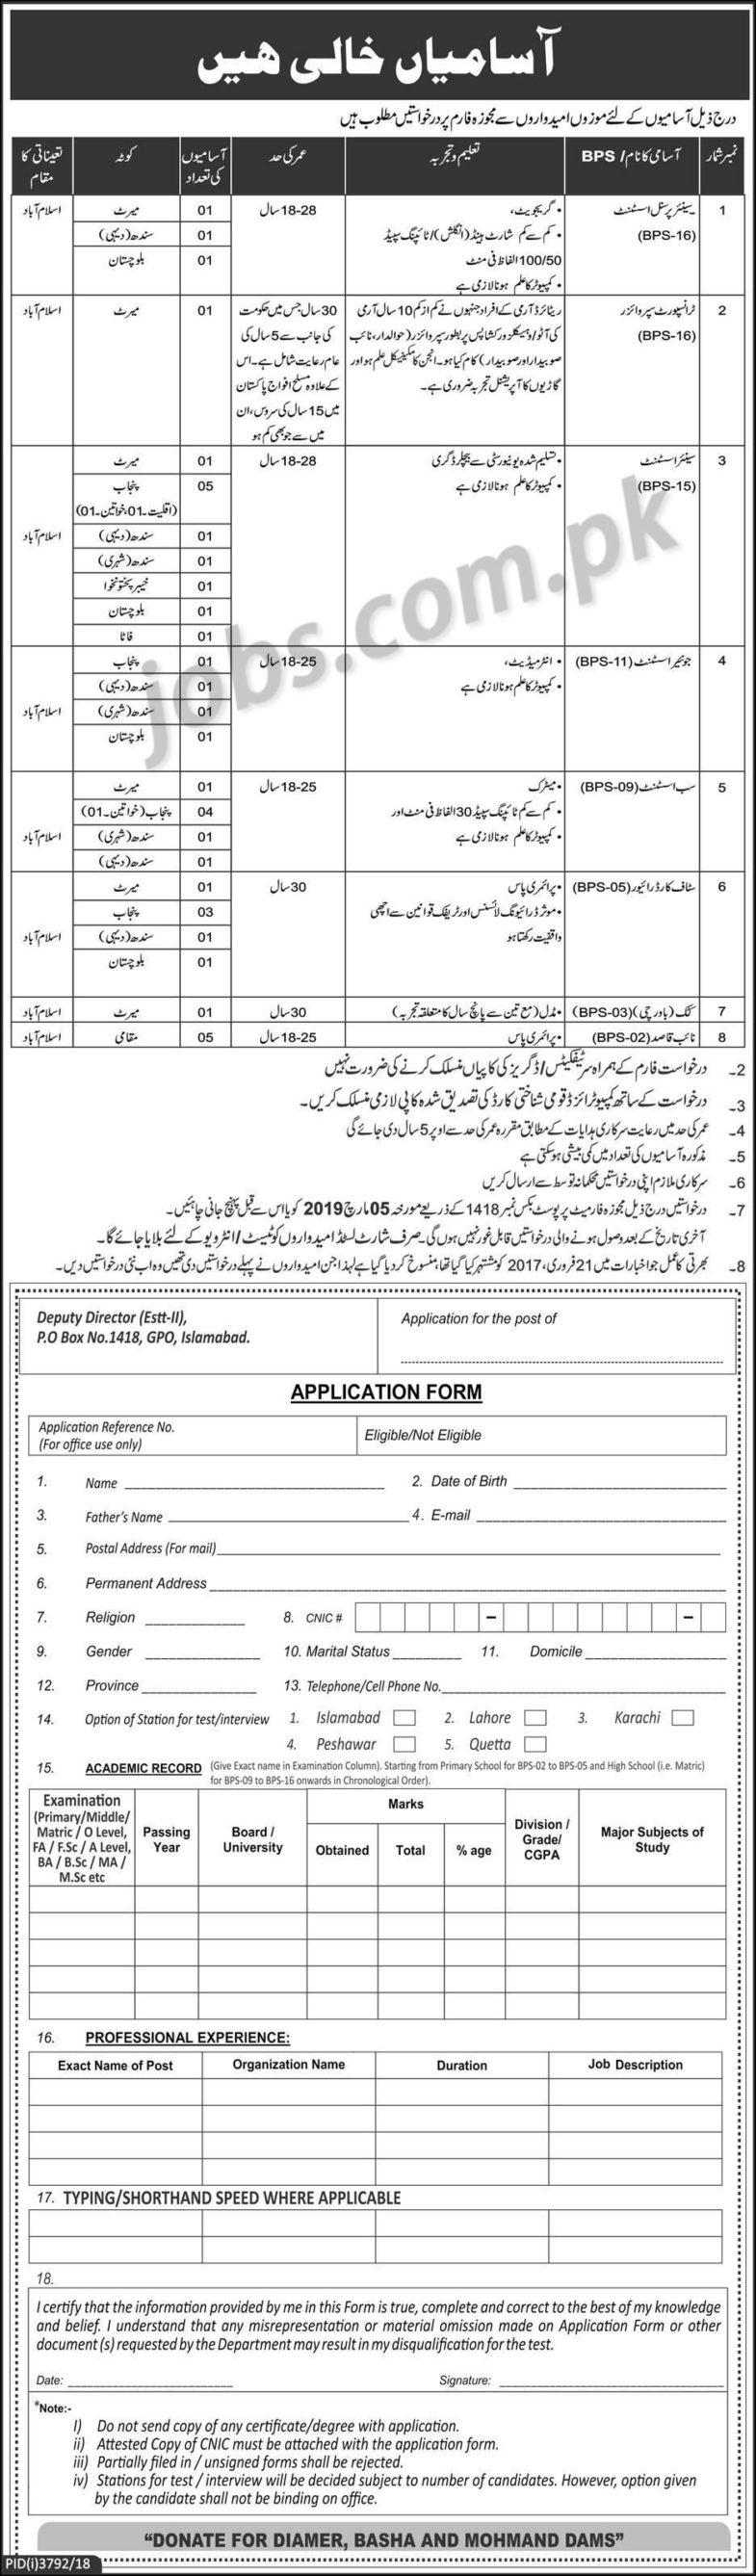 PAEC / PO Box 1418 Islamabad Jobs 2019 for 38+ Sr, Jr & Sub-Assistants, Supervisors, Staff Drivers & Other Posts (Download Application Form)